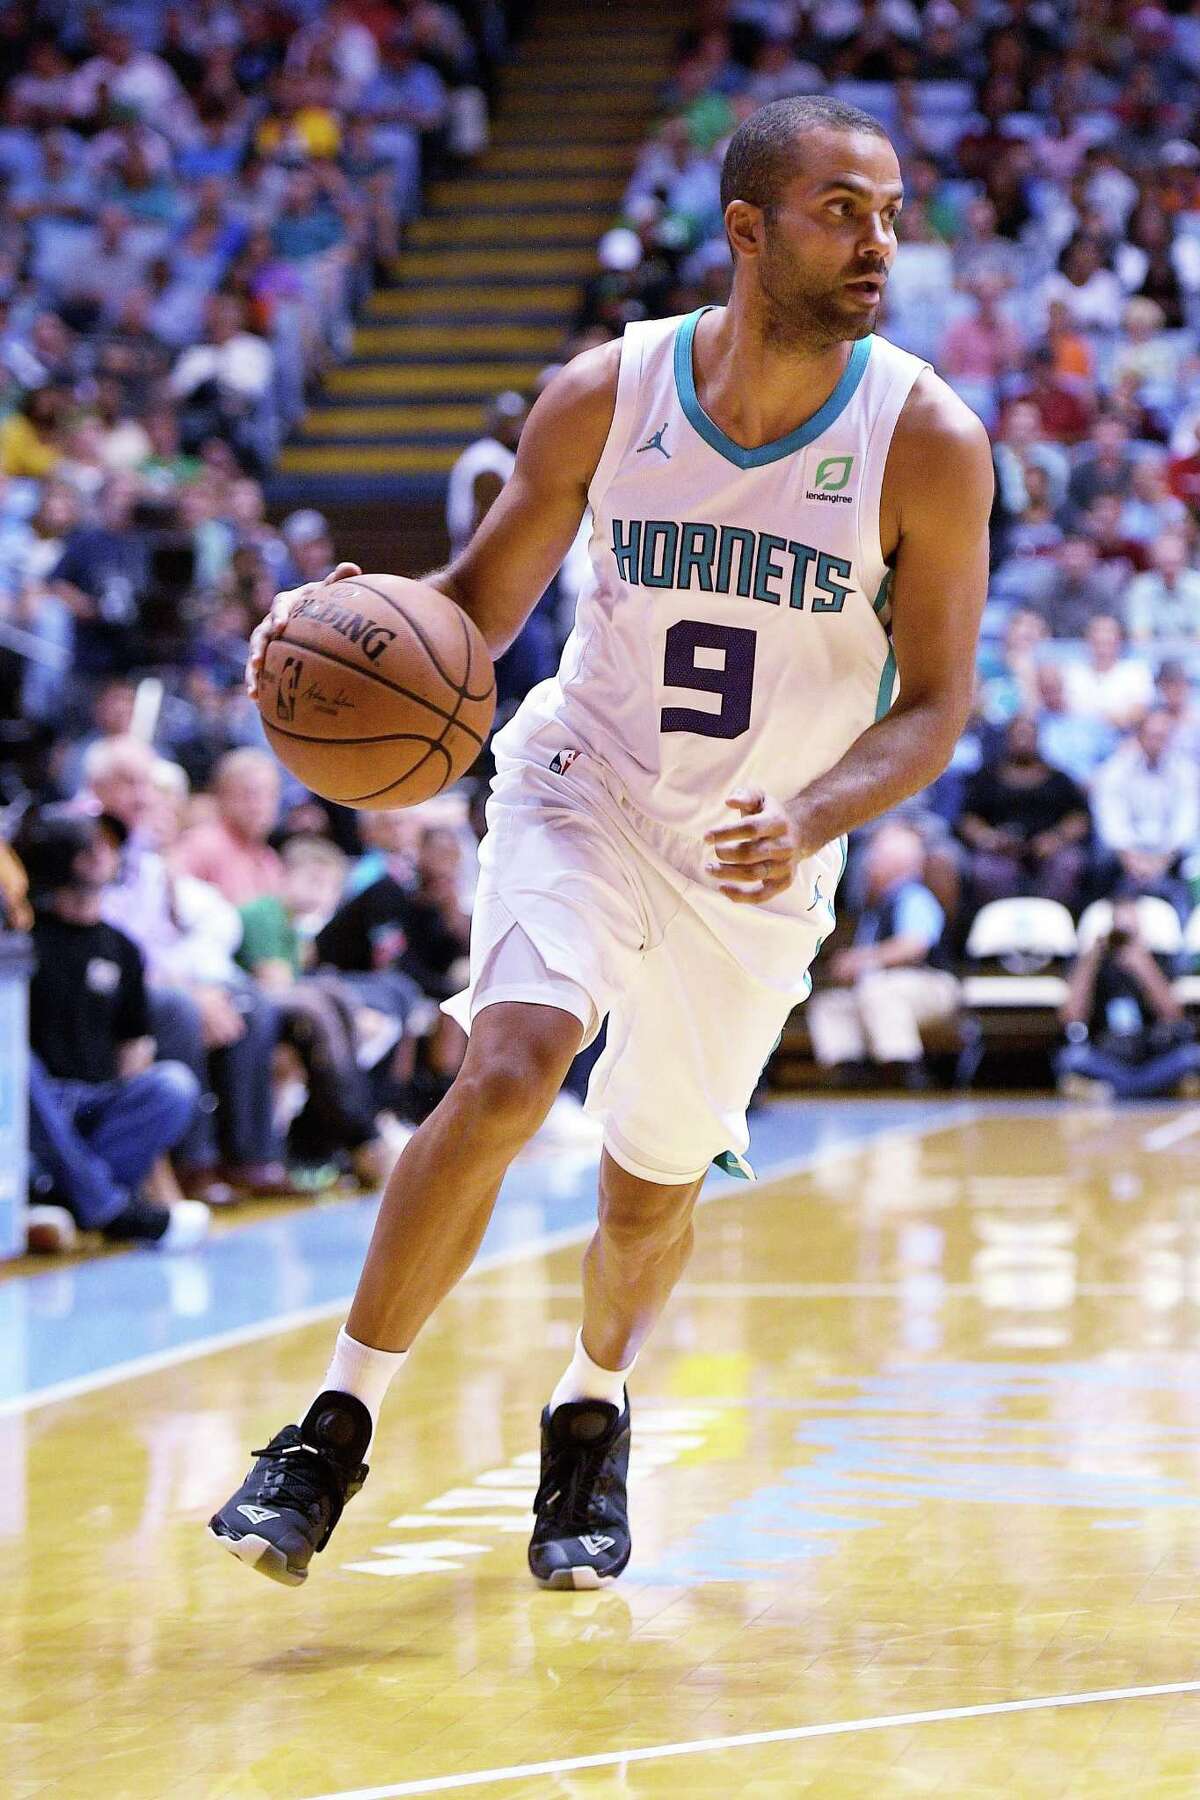 CHAPEL HILL, NC - SEPTEMBER 28: Tony Parker #9 of the Charlotte Hornets moves the ball against the Boston Celtics in the first quarter of a preseason game at Dean Smith Center on September 28, 2018 in Chapel Hill, North Carolina. NOTE TO USER: User expressly acknowledges and agrees that, by downloading and or using this photograph, User is consenting to the terms and conditions of the Getty Images License Agreement. The Hornets won 104-97. (Photo by Lance King/Getty Images)